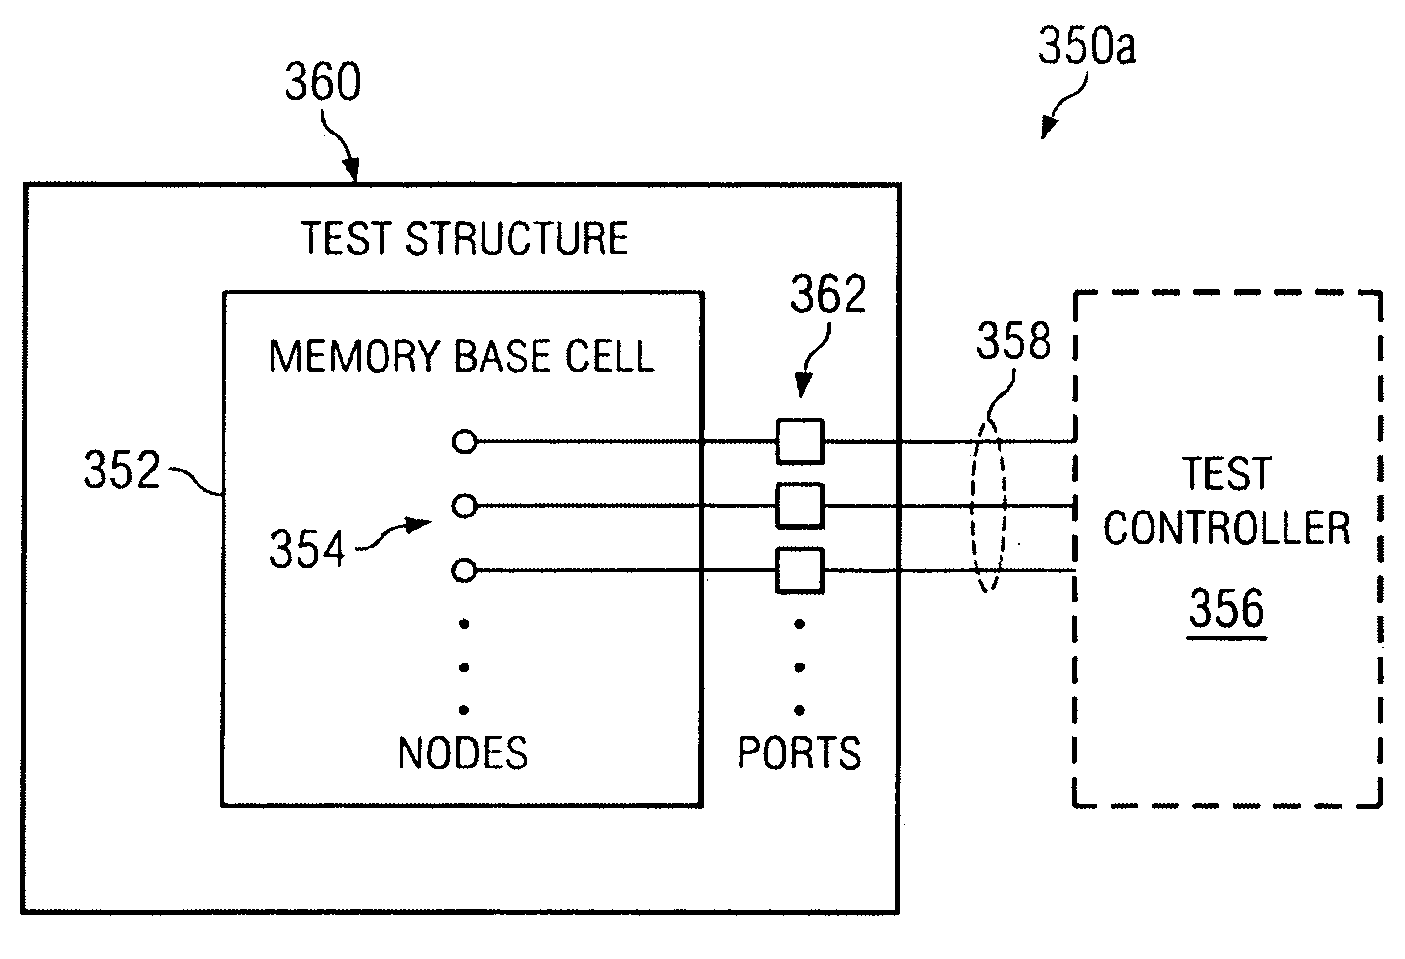 Method for memory cell characterization using universal structure